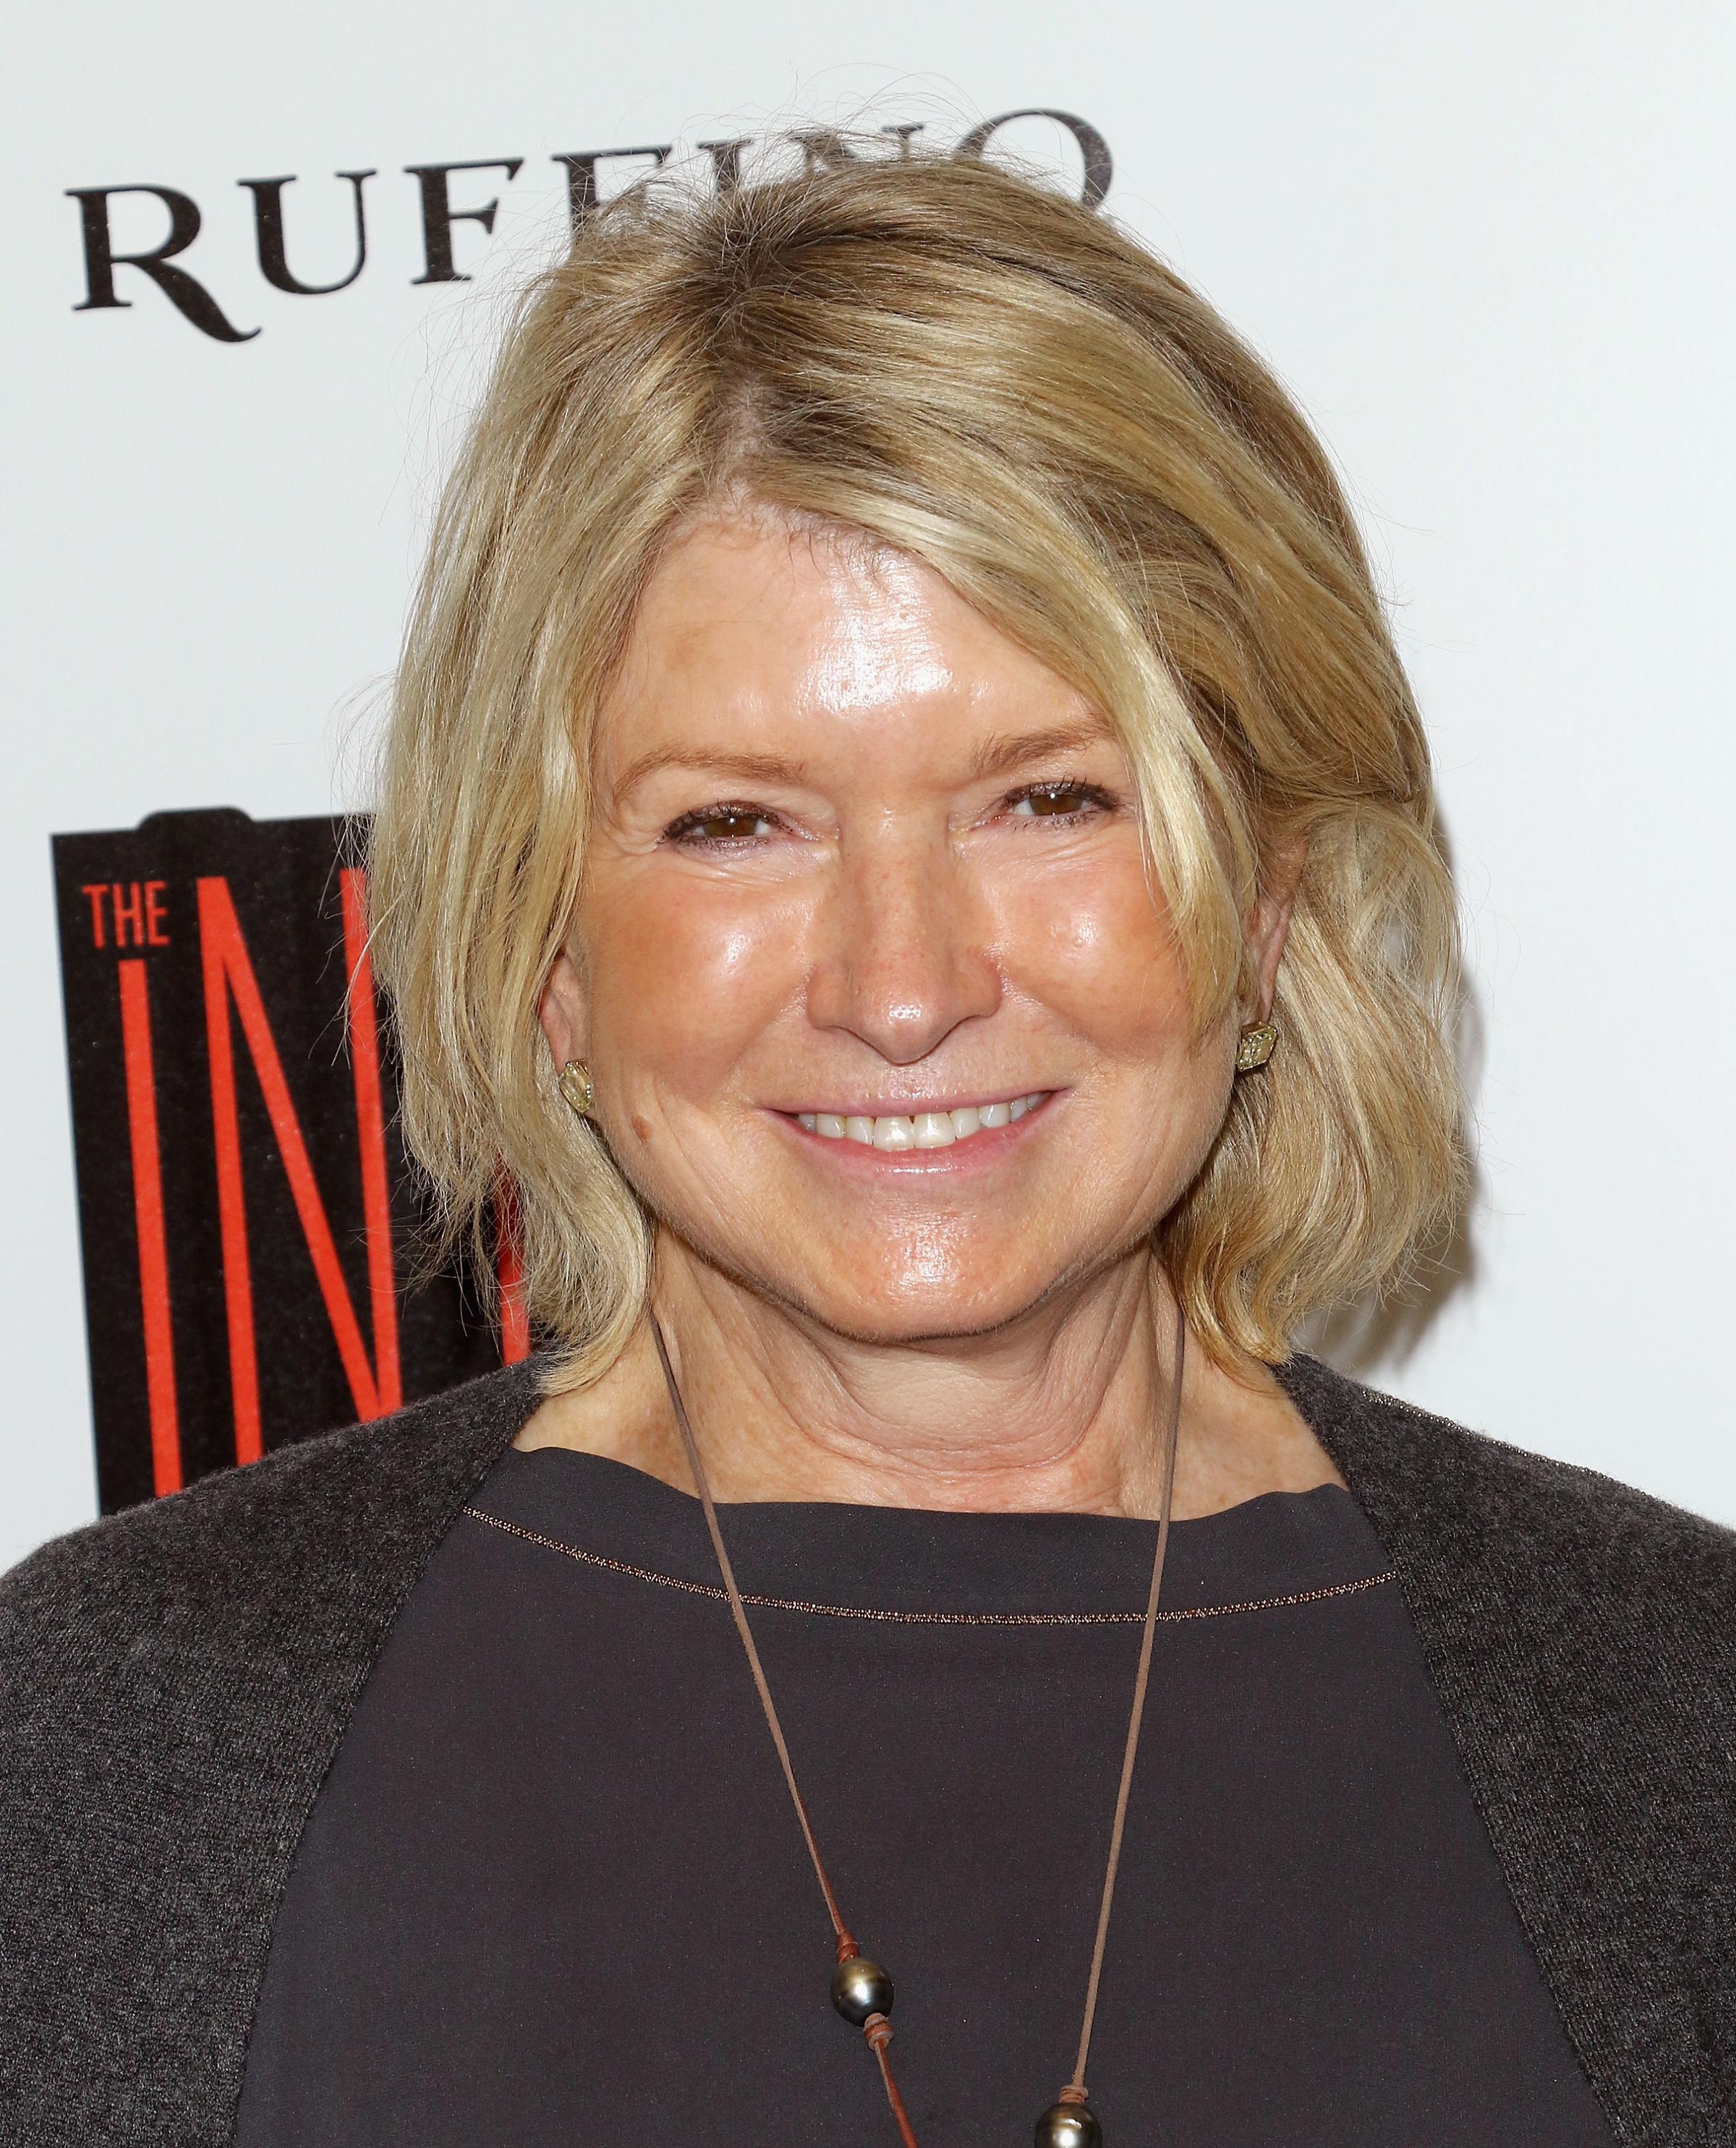 Martha Stewart at the screening of "The Intern" in New York City on Sept. 22, 2015.